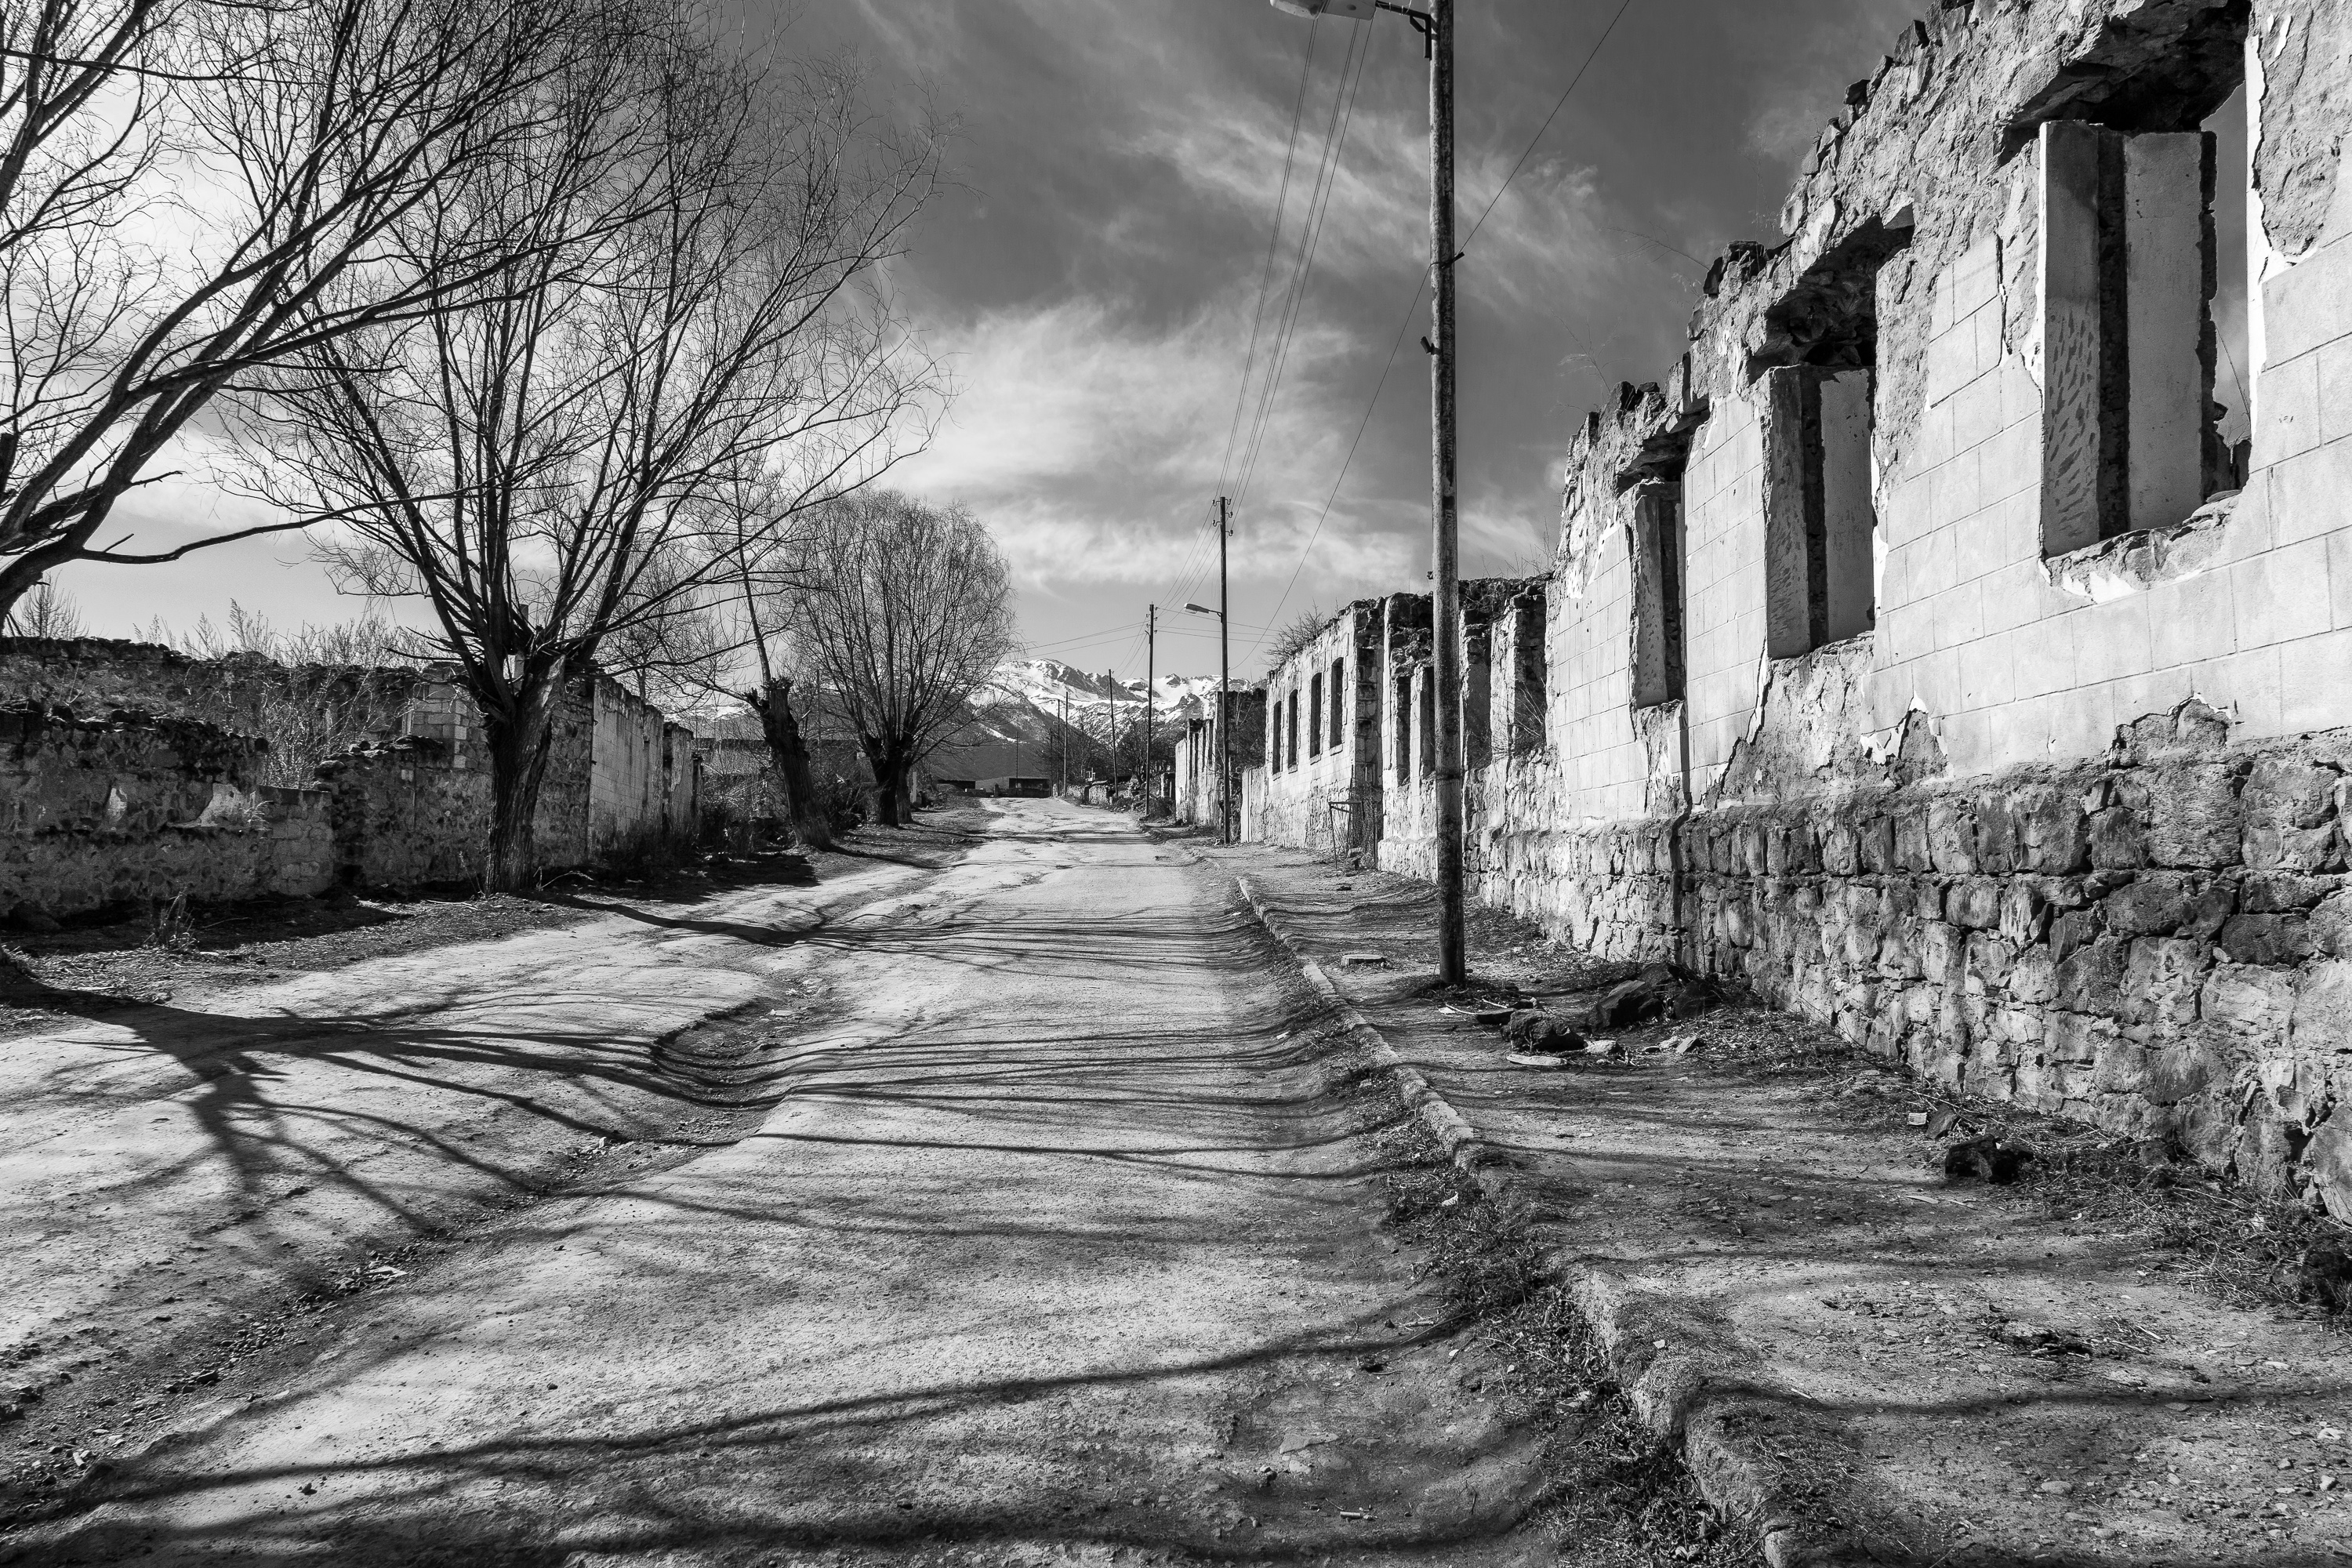 Photo by David Verberckt. Ethnically cleansed town of Karvachar, Nagorno-Karabakh, South Caucasus, February 2014.